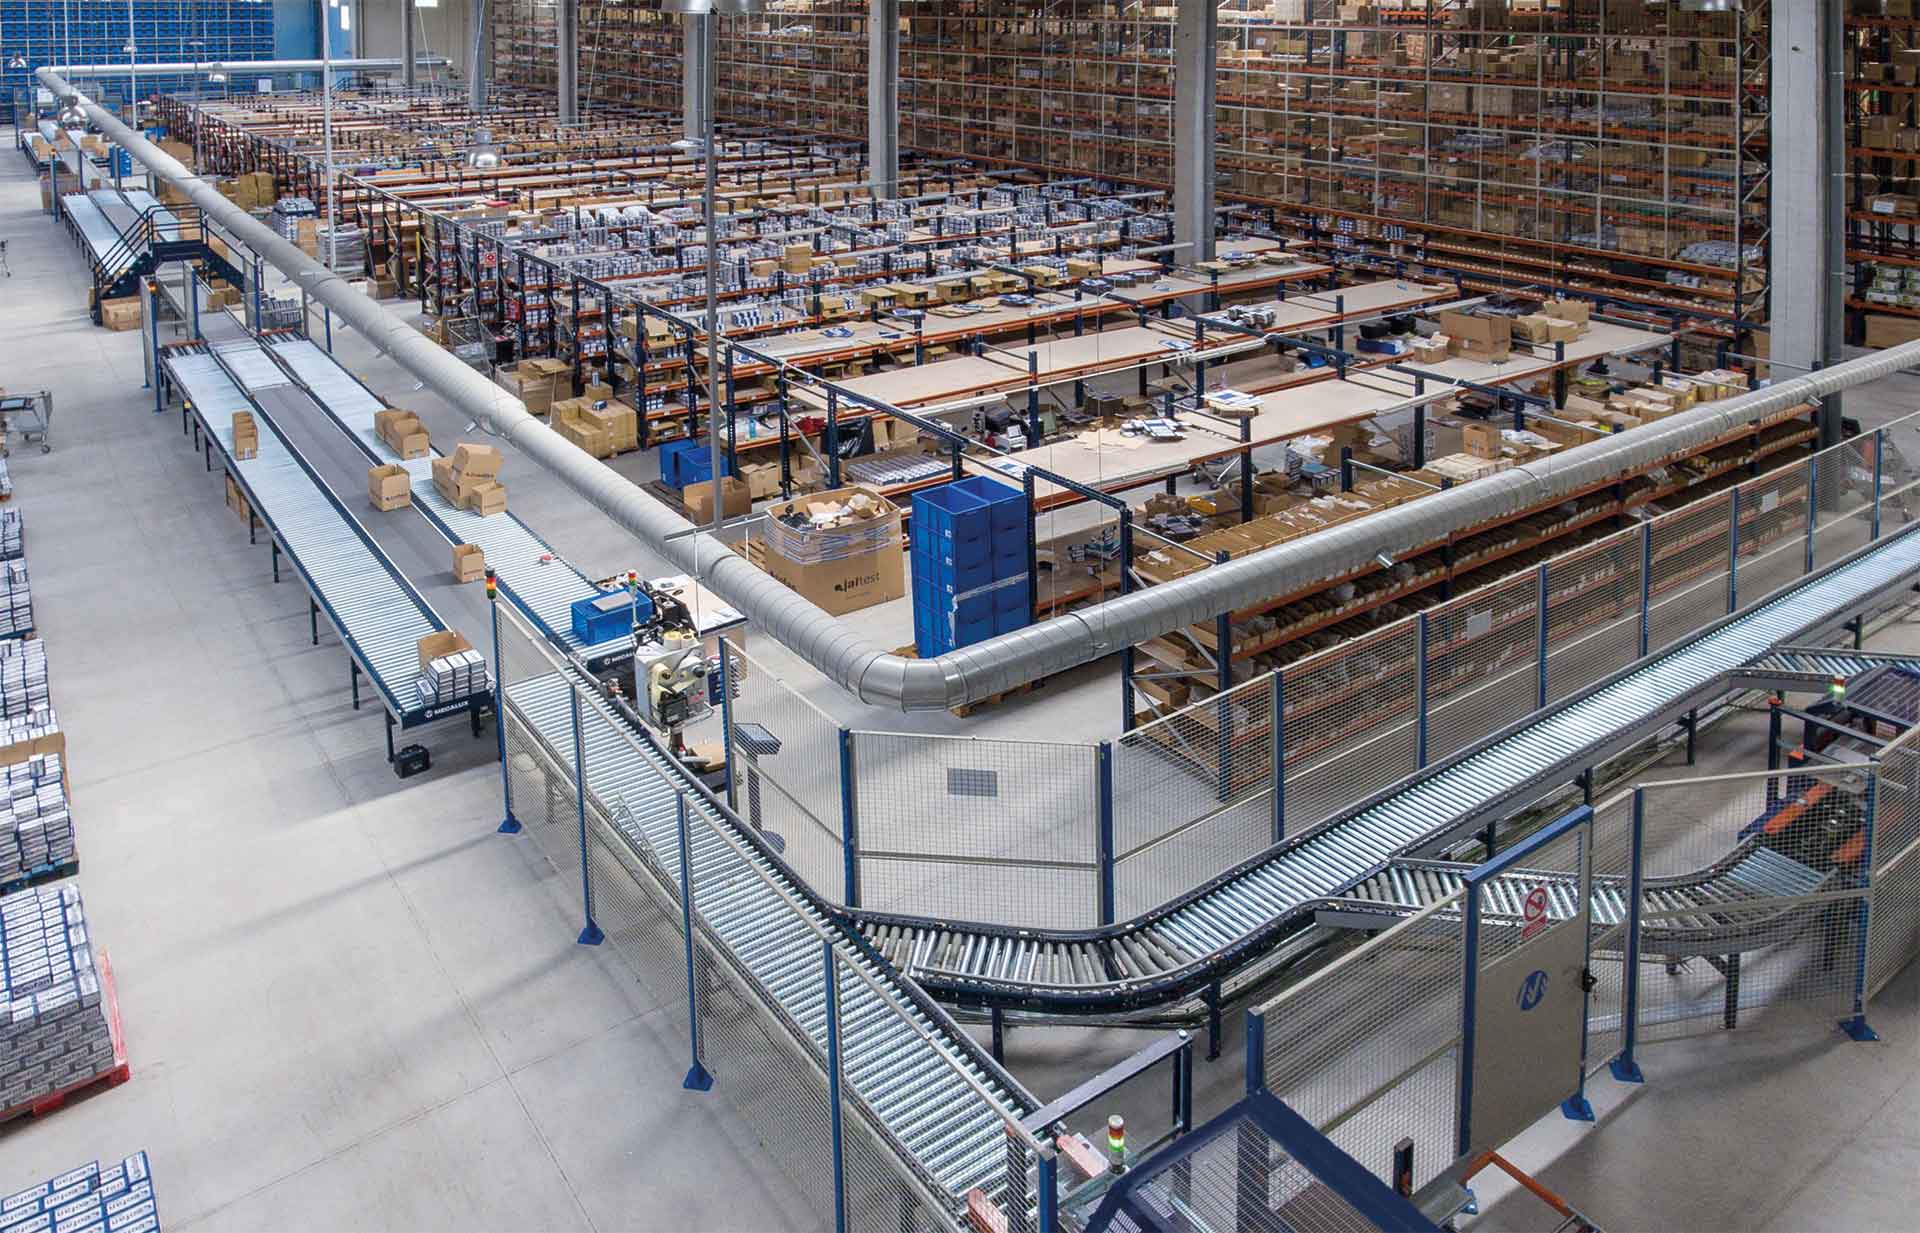 Warehouse Optimization: Systems that maximize your storage capacity